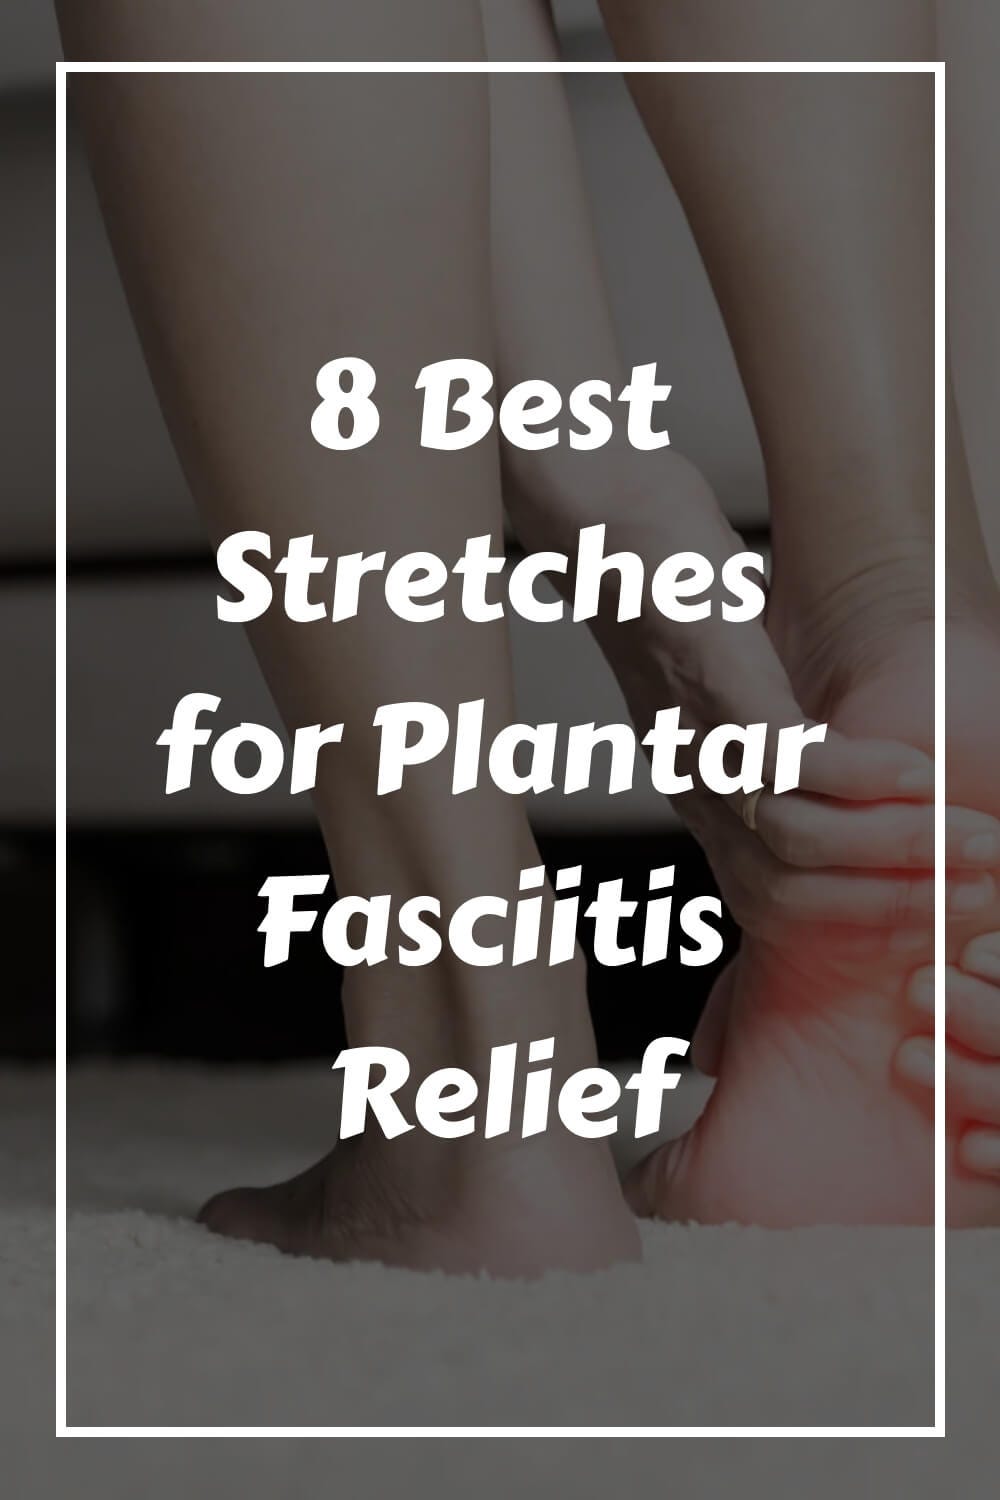 8 Best Stretches for Plantar Fasciitis Relief